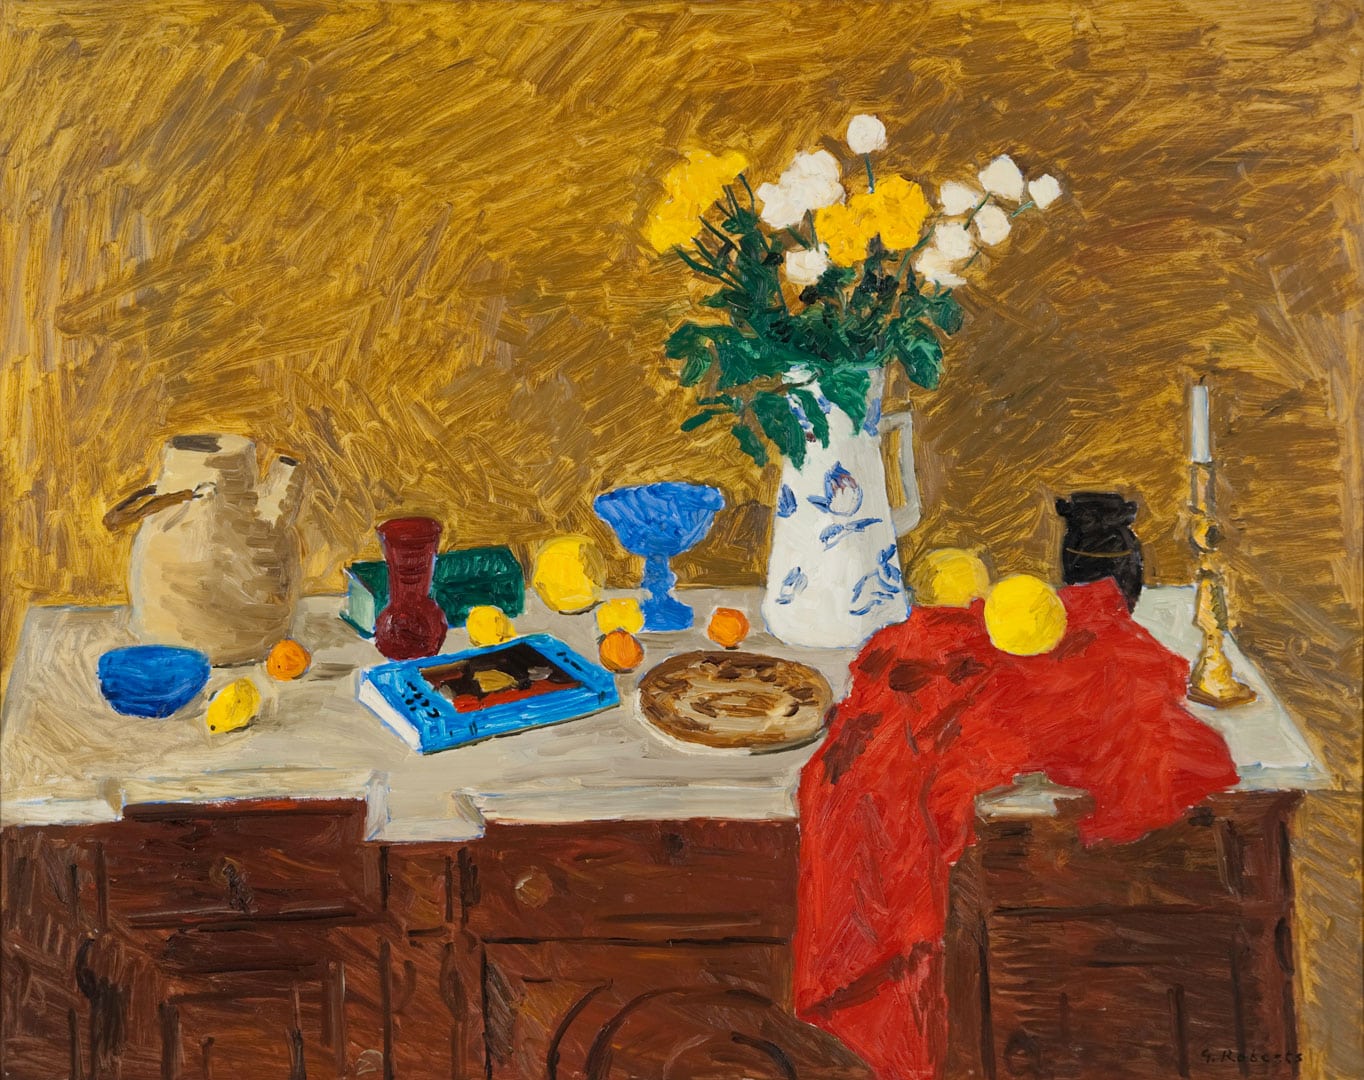 Goodridge Roberts, Still Life on Sideboard with Yellow and White Flowers, 1961, oil on panel. Purchase, Chancellor Richardson Memorial Fund, Wintario matching funds, the Walter and Duncan Gordon Charitable Foundation, Dr Albert Fell, and the Gallery Association, in memory of Dr Ken Gunn, 1987 (30-107)